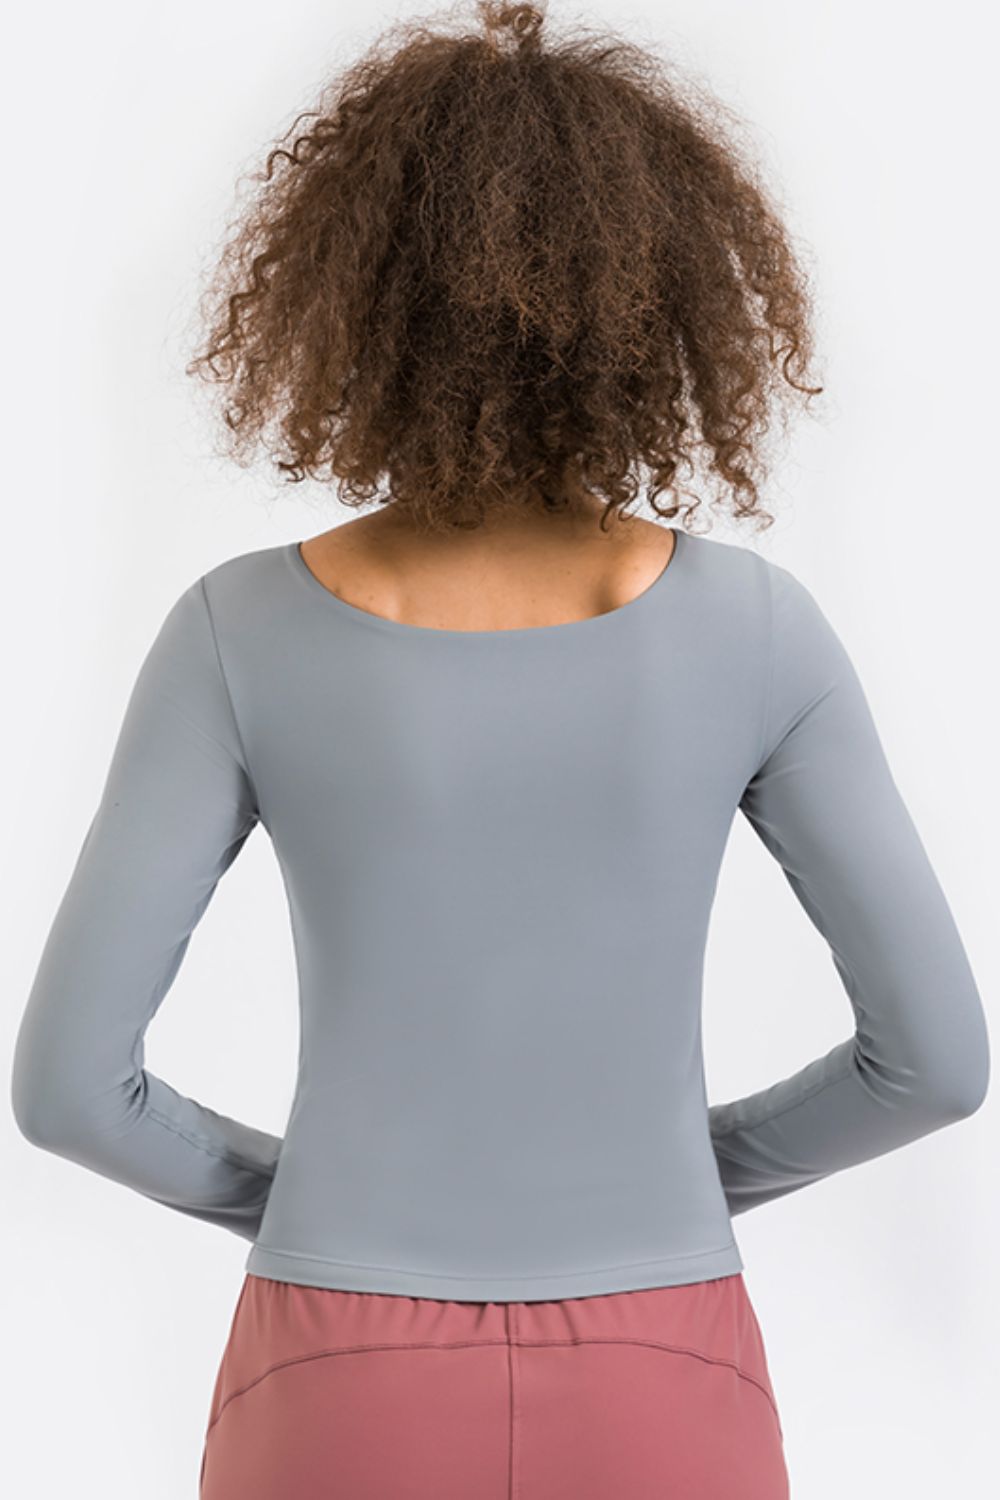 Feel Like Skin Highly Stretchy Long Sleeve Sports Top - DromedarShop.com Online Boutique